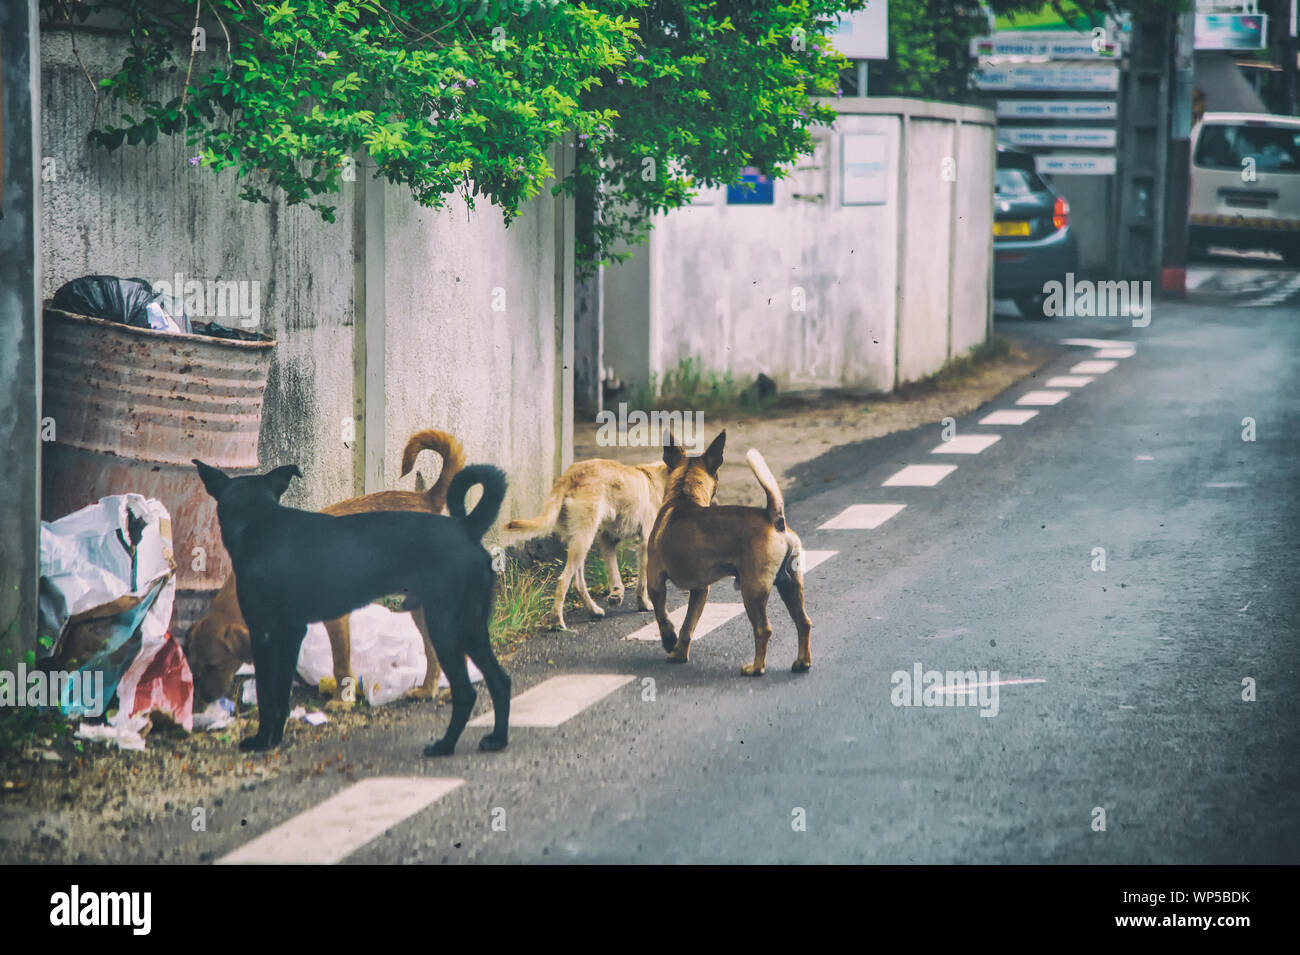 https://c8.alamy.com/comp/WP5BDK/stray-dogs-looking-for-food-on-the-streets-WP5BDK.jpg